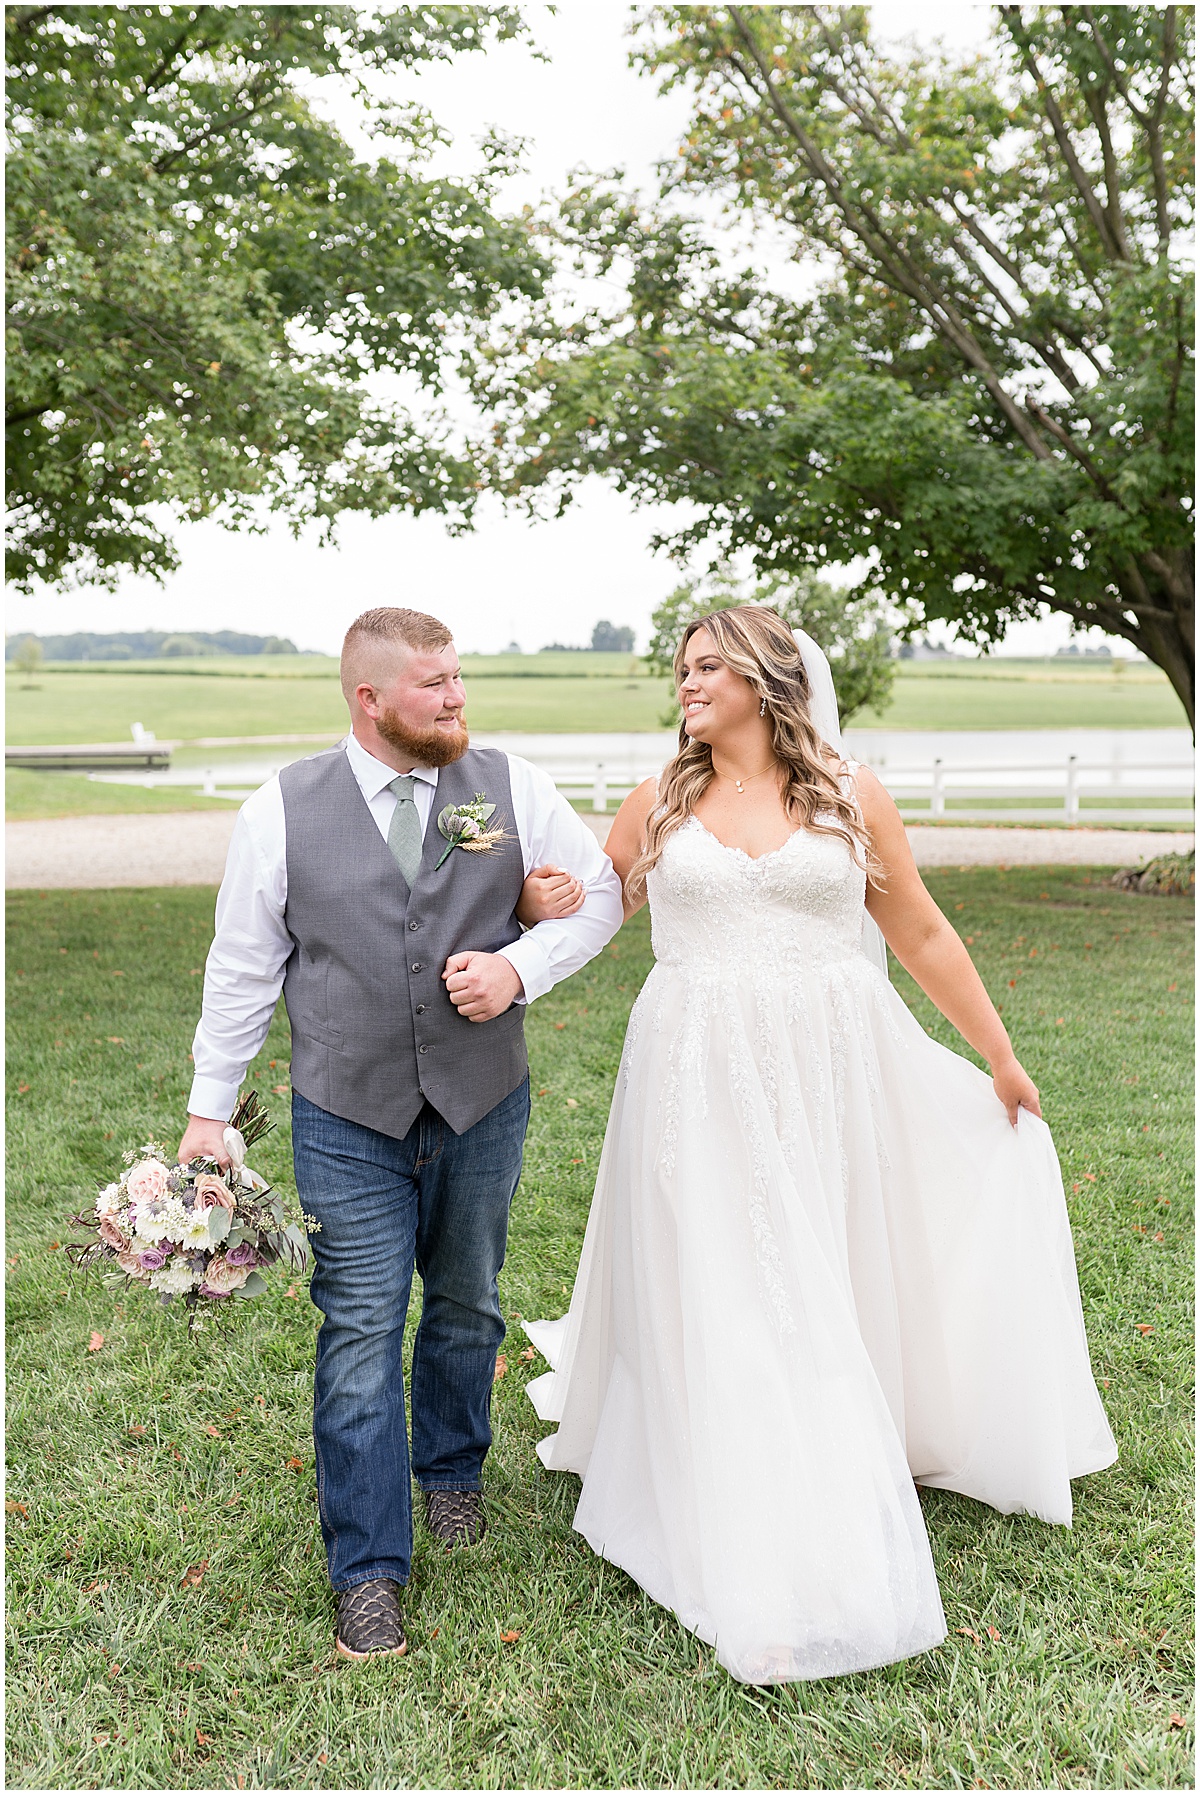 Bride and groom walk together outside before private property wedding in Peru, Indiana